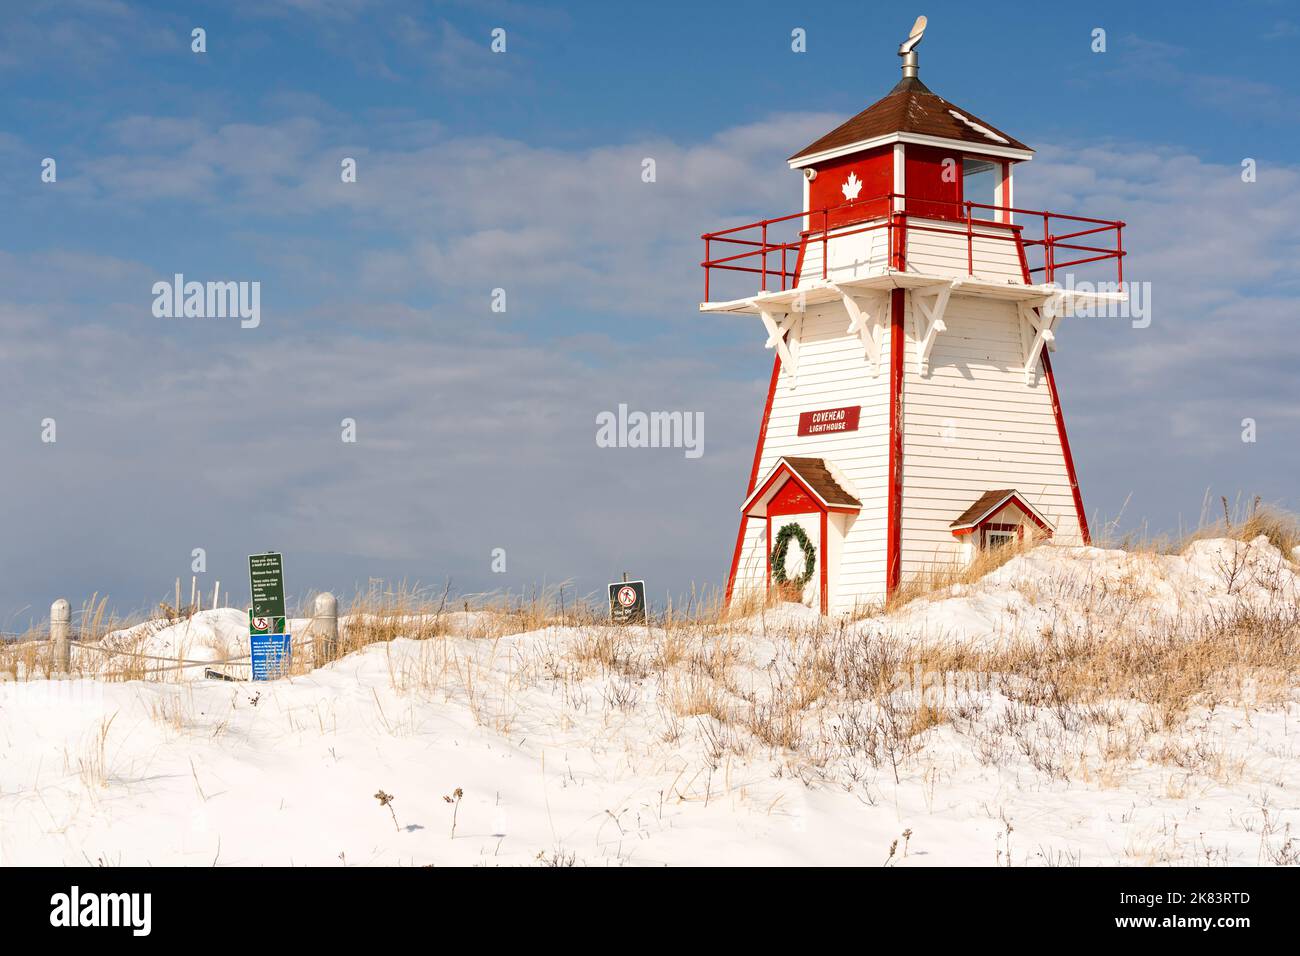 Covehead lighthouse decorated with a Christmas wreath. Located in PEI National Park, Prince Edward Island, Canada. Stock Photo